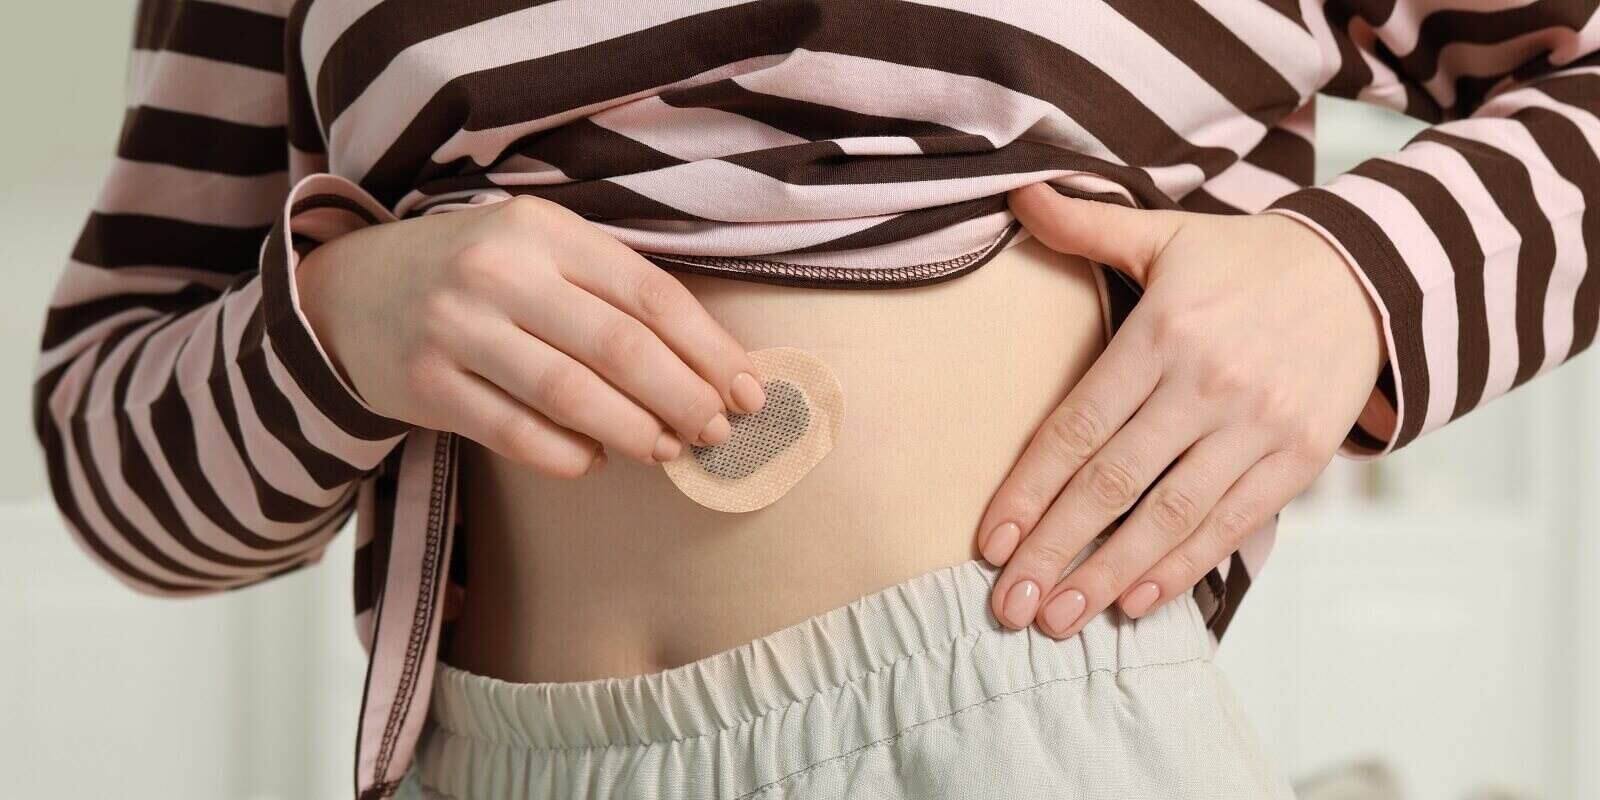 NC woman applying contraceptive patch onto her belly